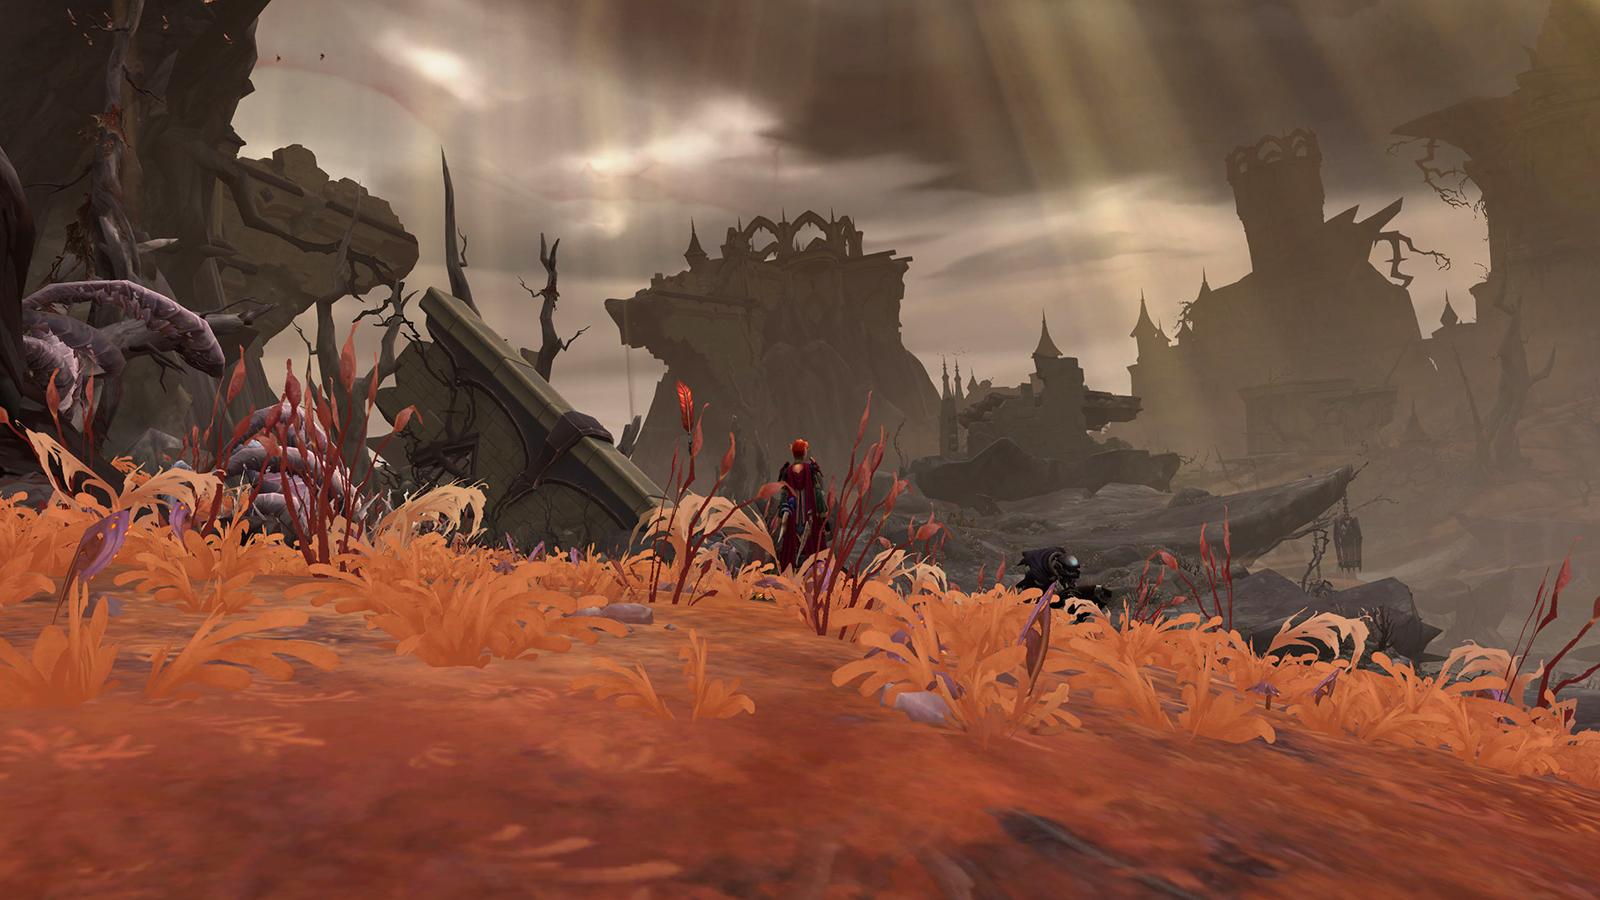 Revendreth in WoW Shadowlands, with craggy cliffs and dried grass